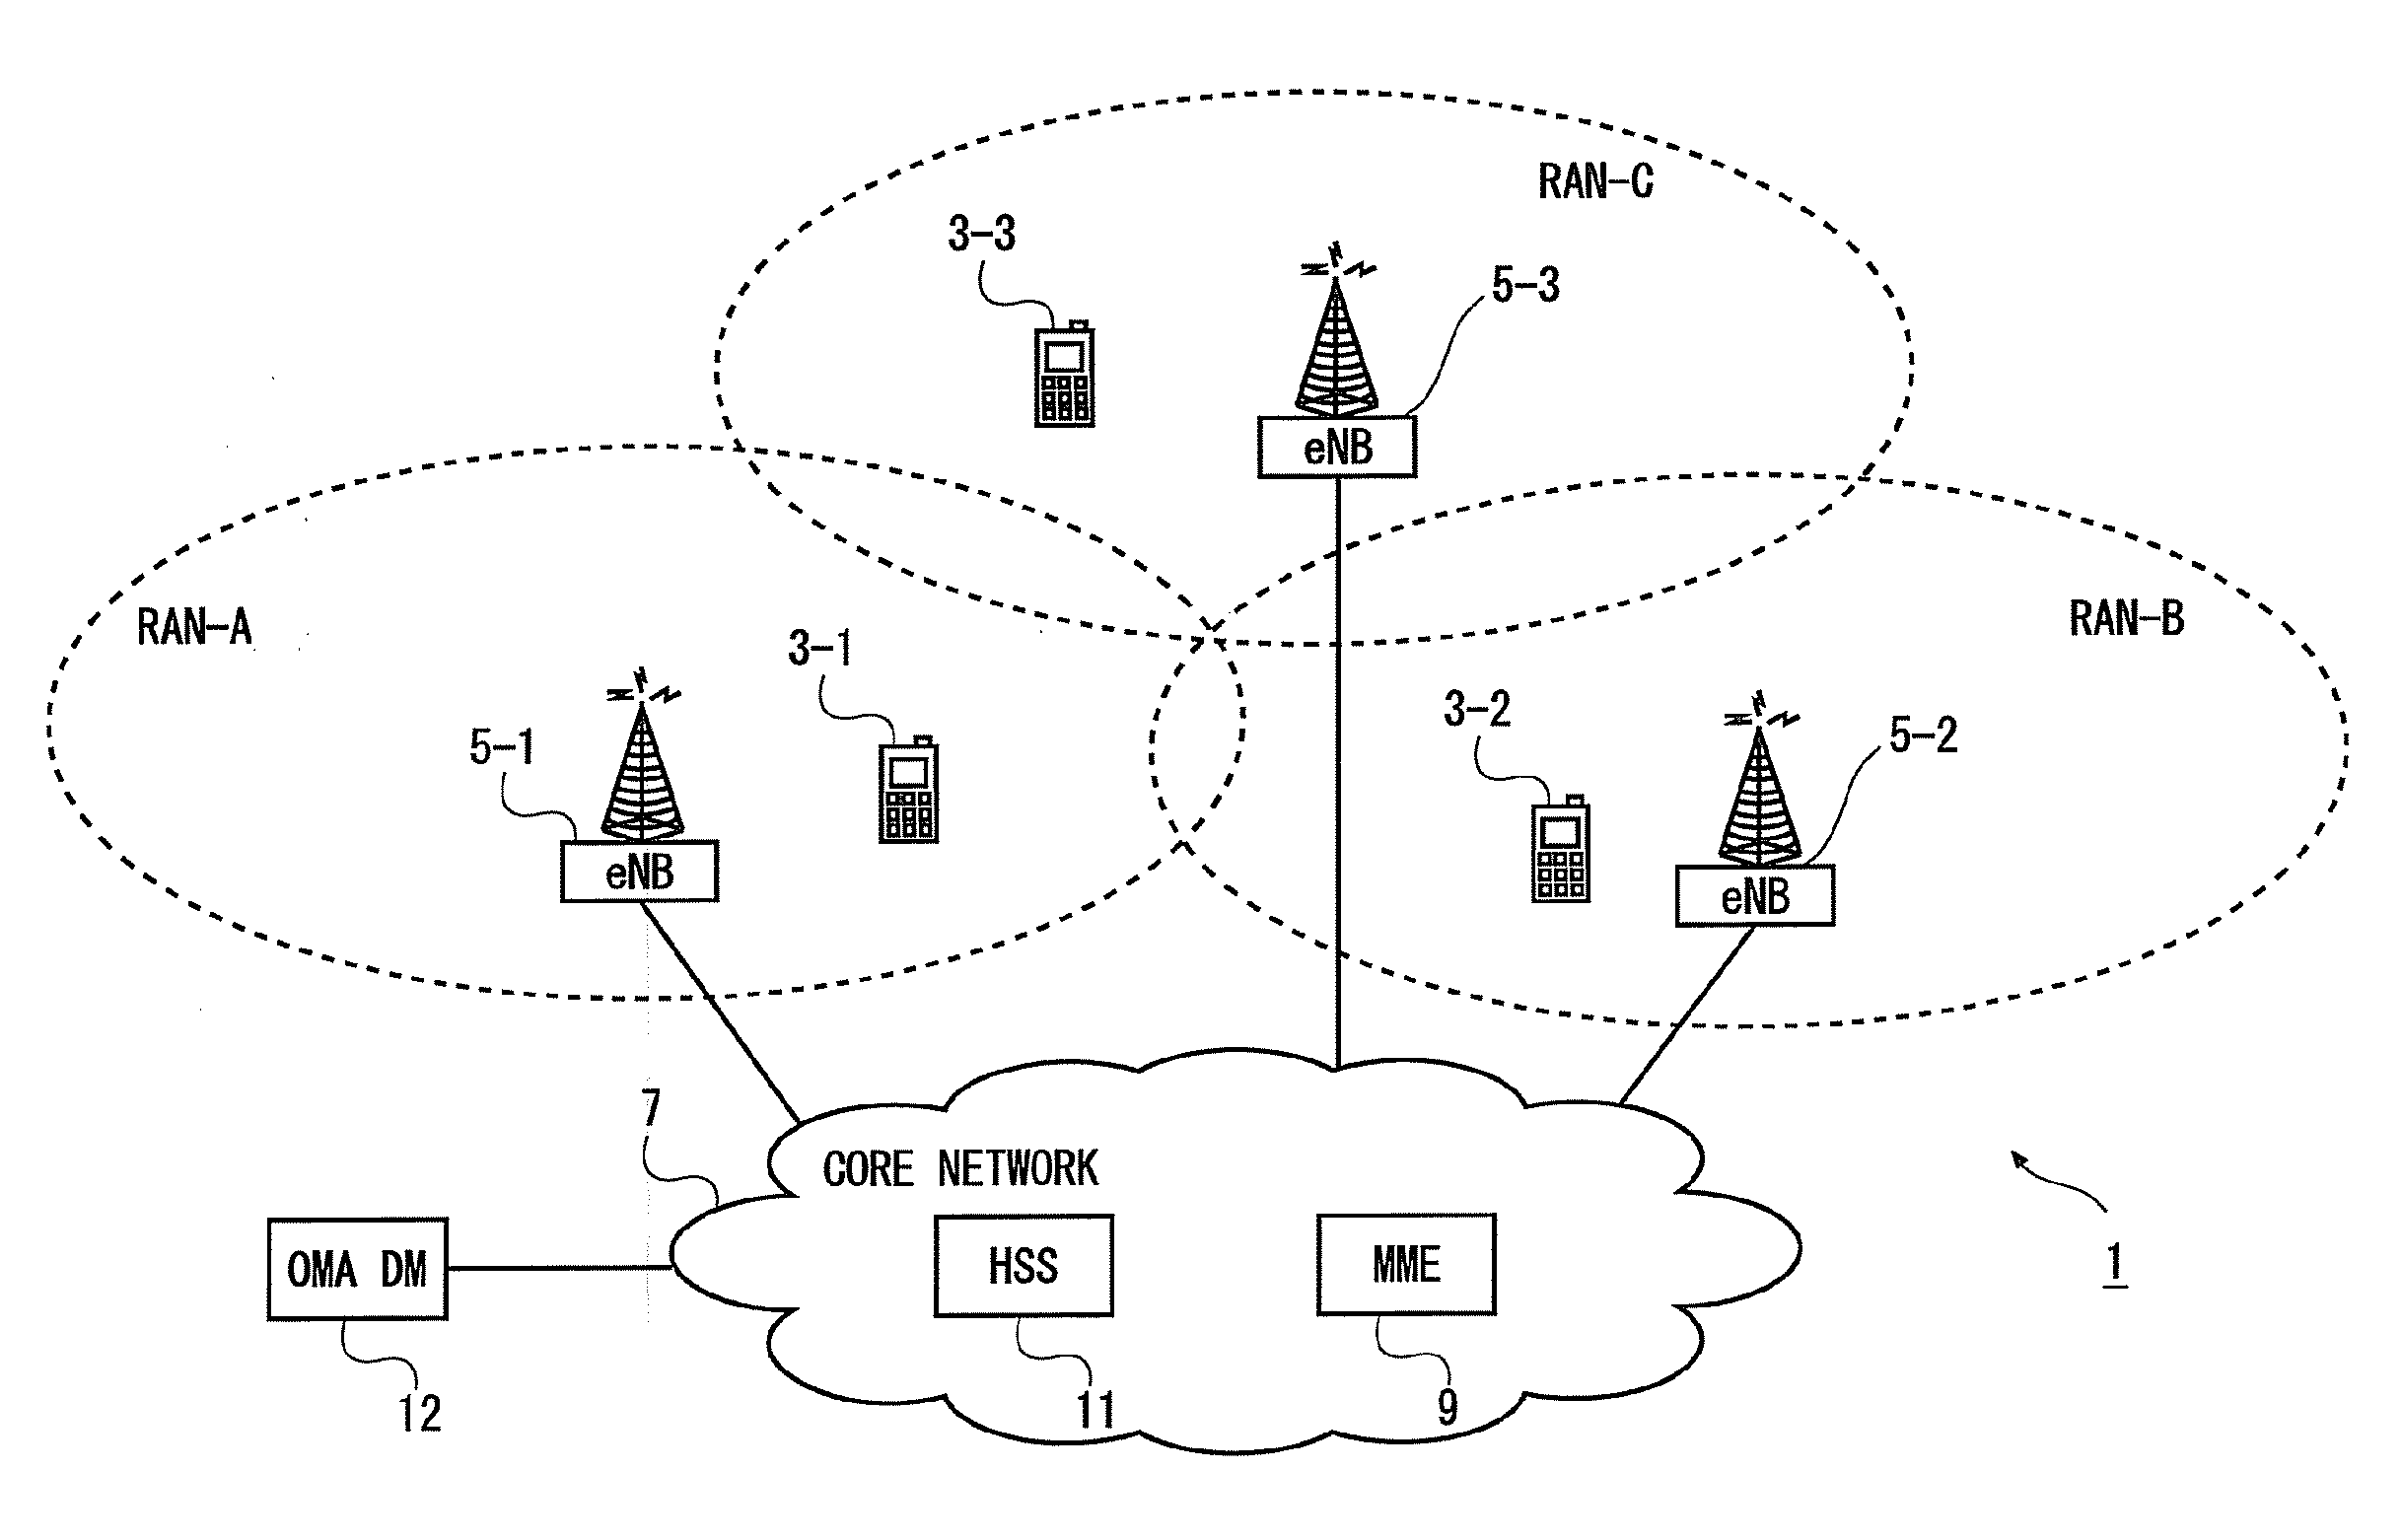 Mobile telephone, apparatus, method and computer implementable instructions product